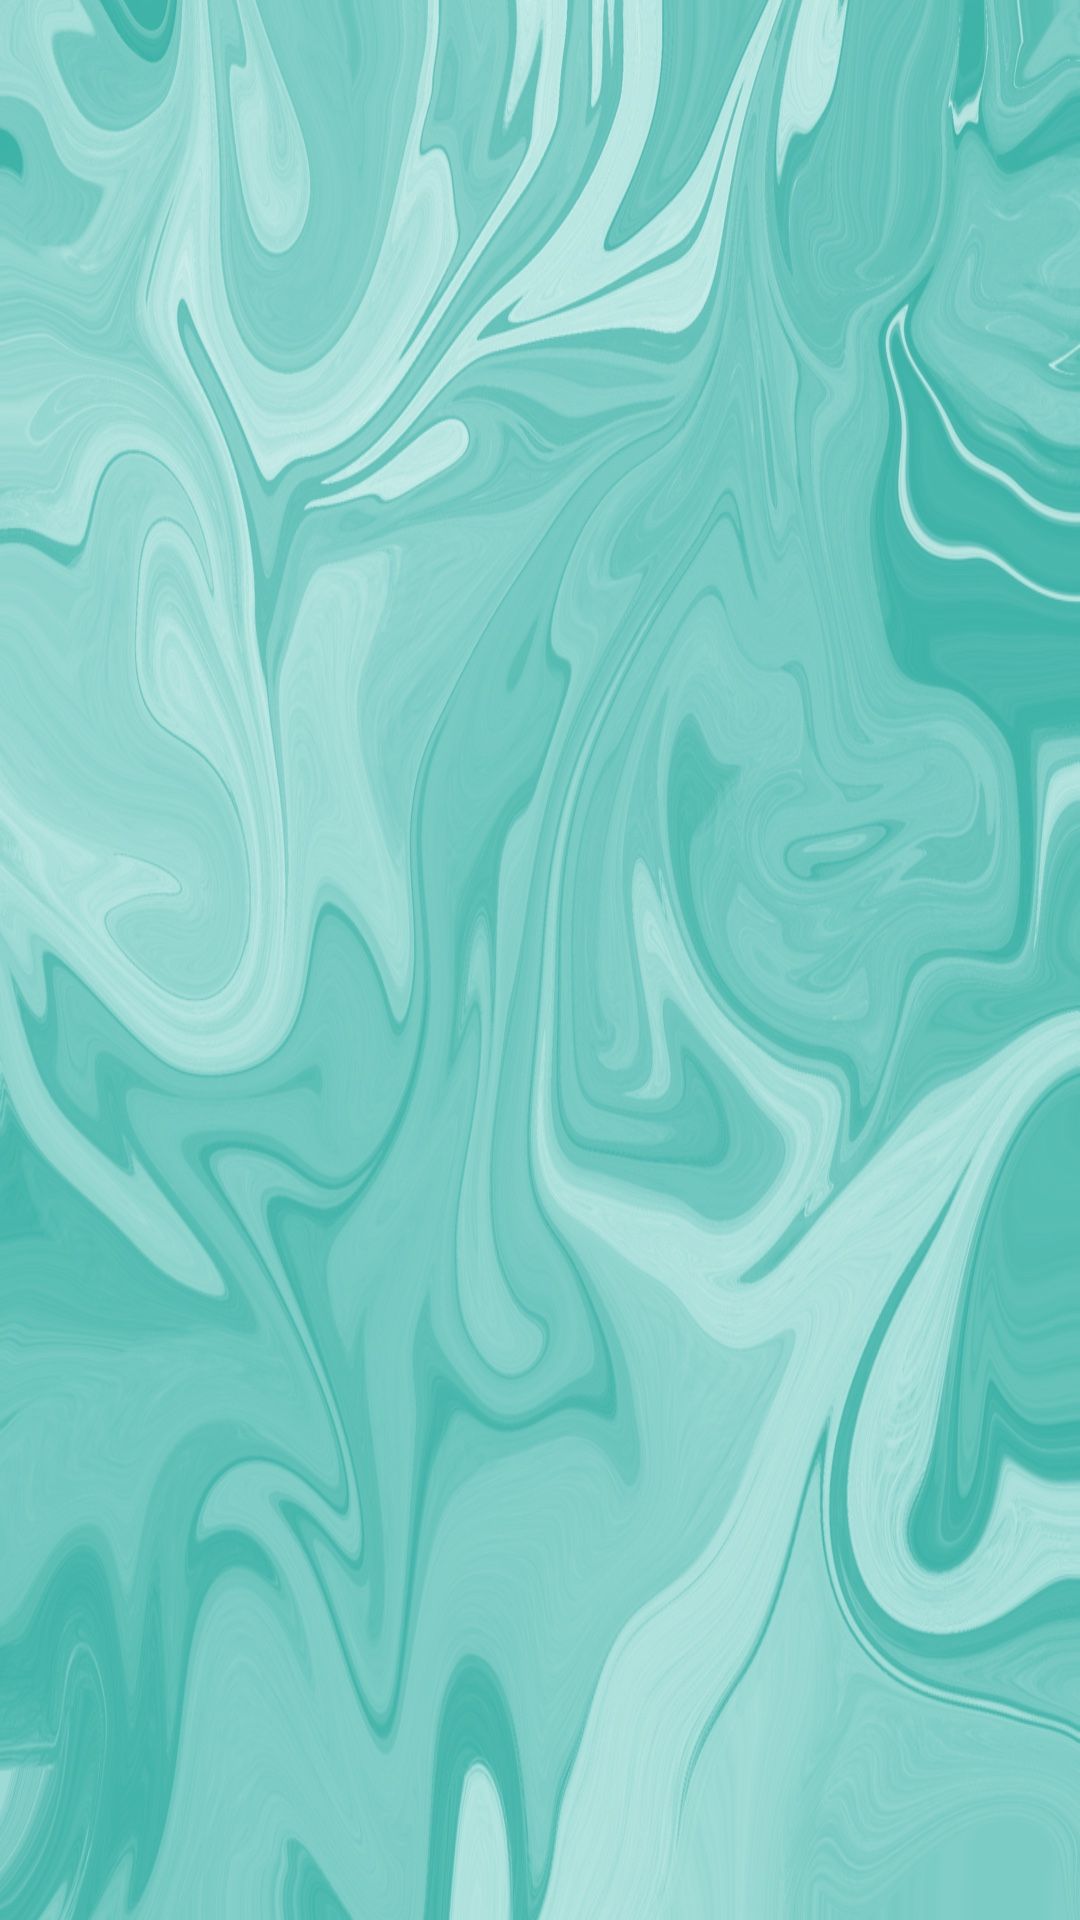 Teal and white marble background - Teal, turquoise